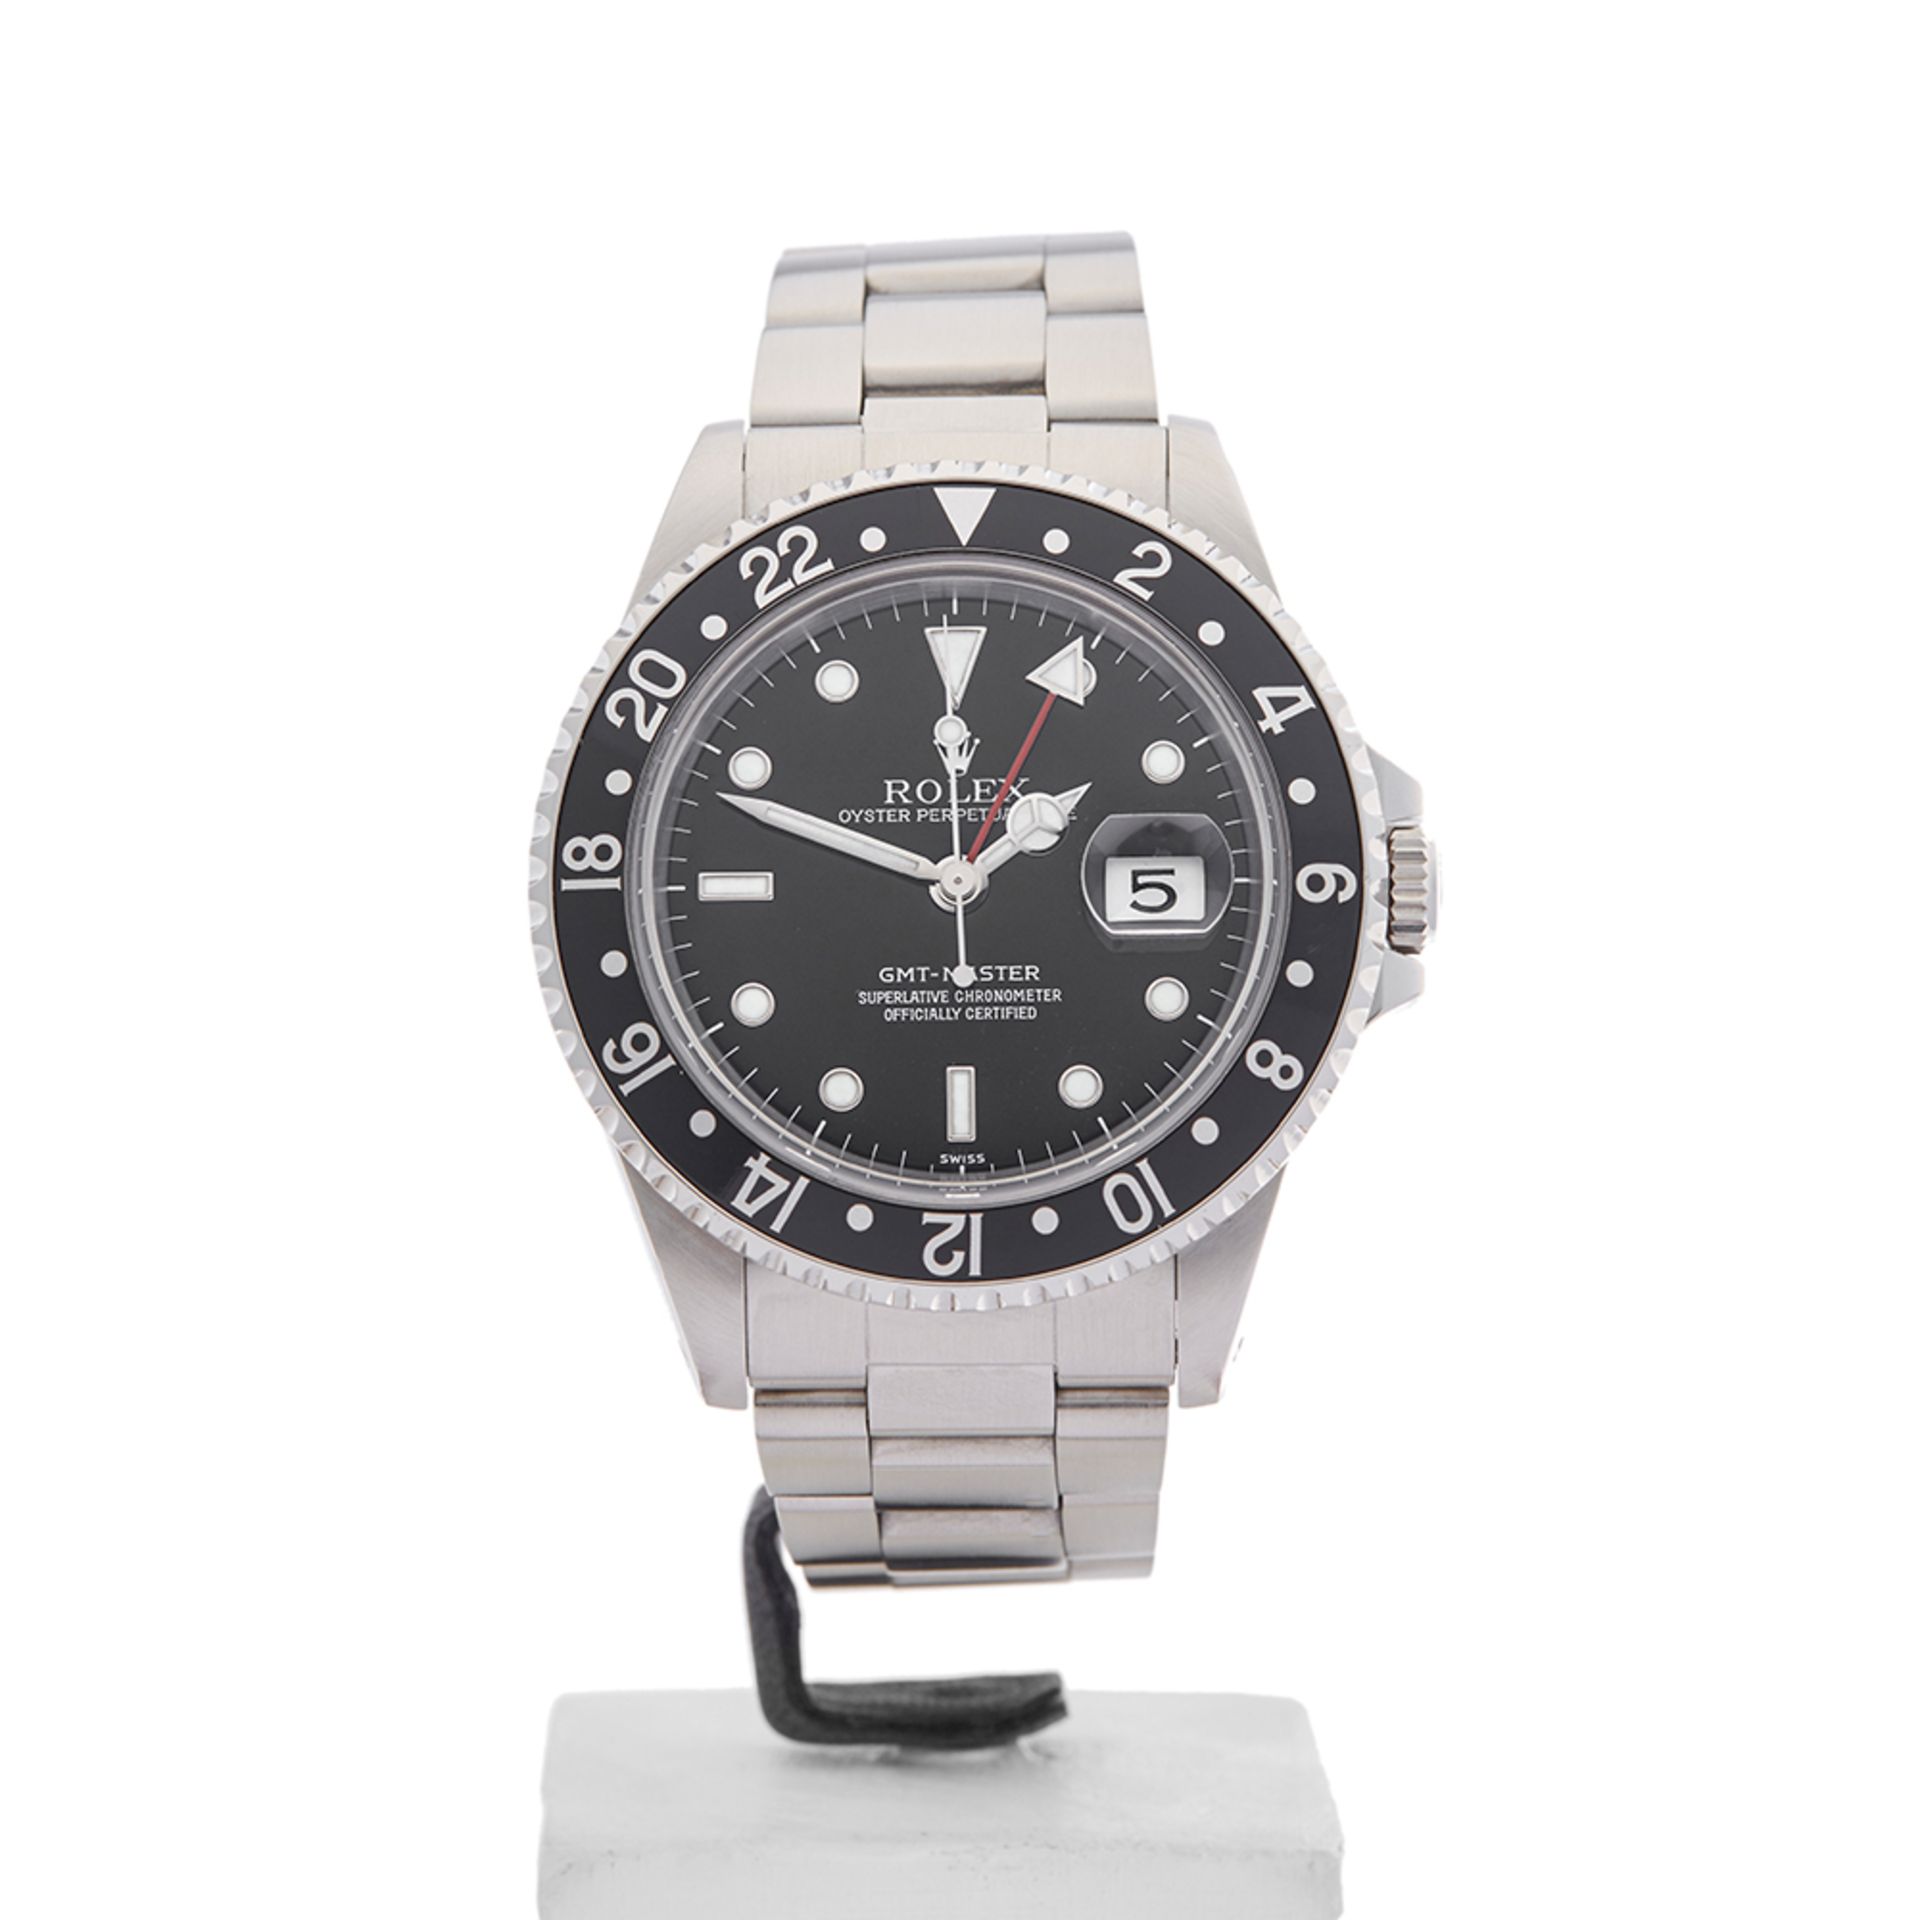 Rolex GMT-Master 40mm Stainless Steel - 16700 - Image 2 of 9